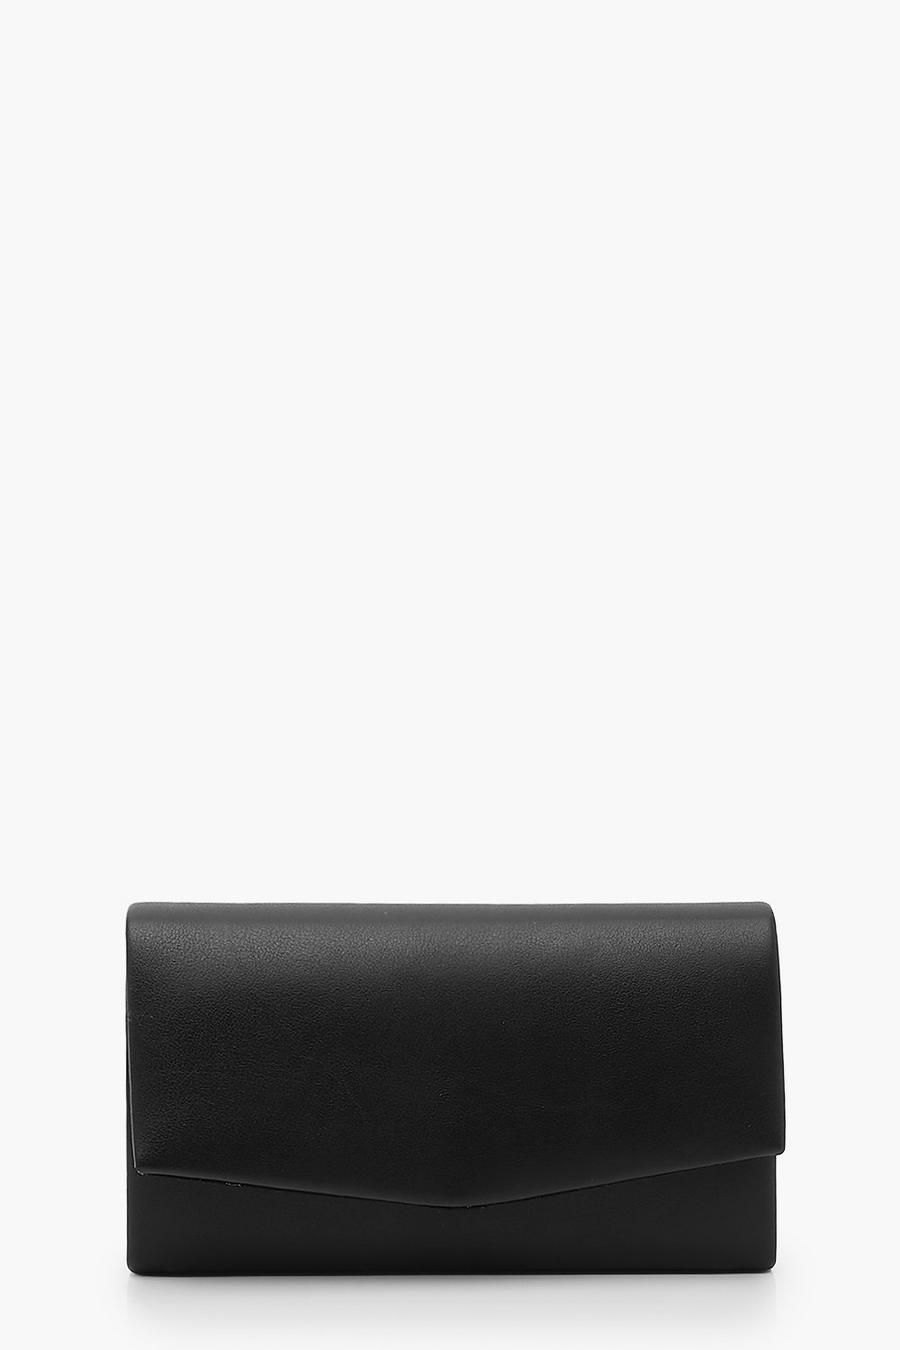 Black Coccinelle leather cross body bag image number 1